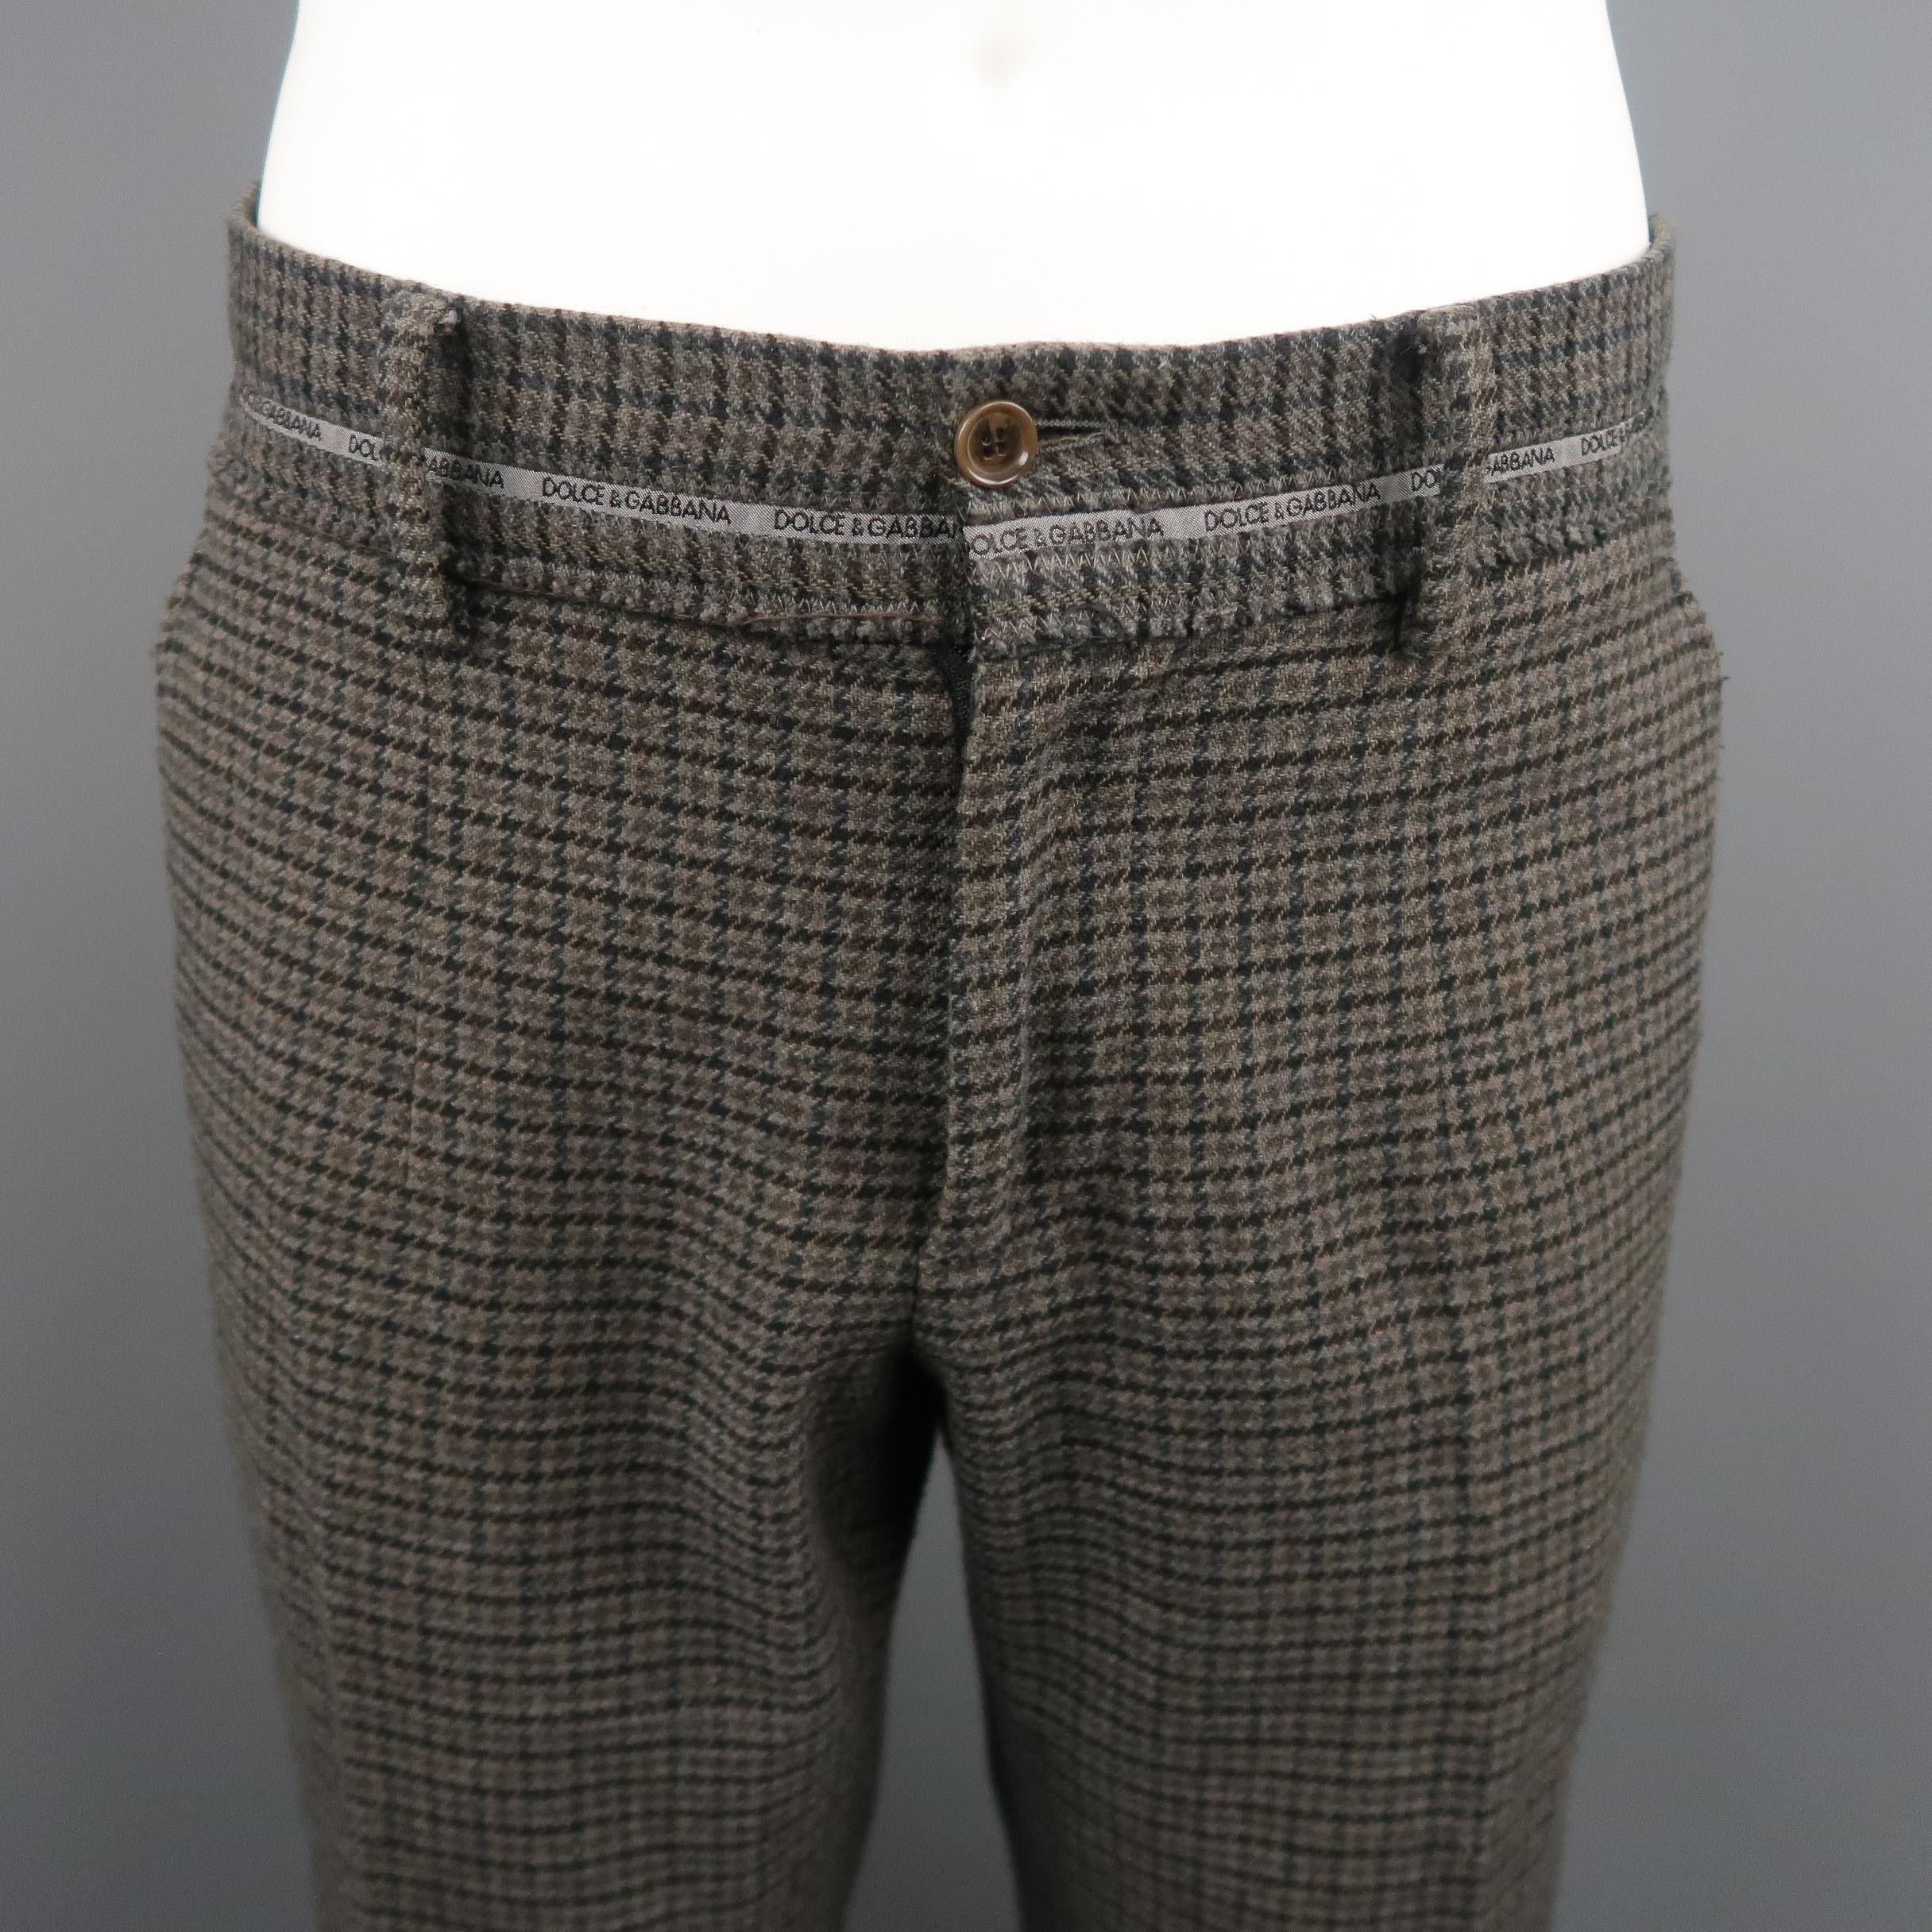 DOLCE & GABBANA Casual pants comes in grey and brown tones in a houndstooth wool / cotton material, with a wide waistband, buttoned pockets and zip fly. Made in Italy.
 
Excellent Pre-Owned Condition.
Marked: 50 IT
 
Measurements:
 
Waist: 35